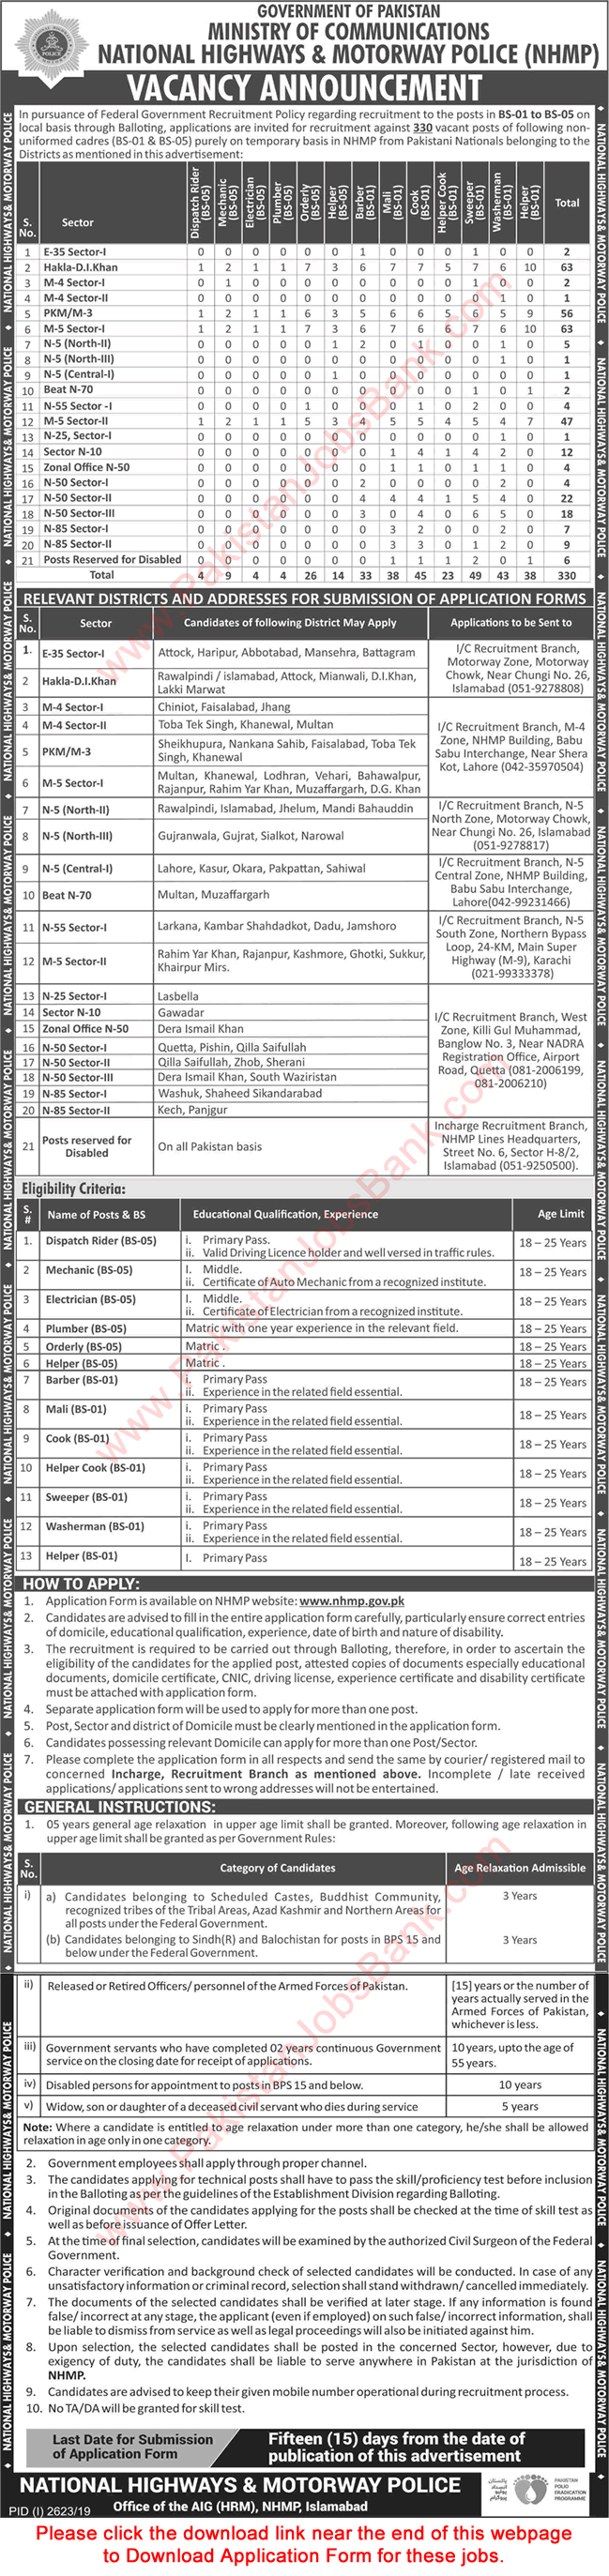 National highway and motorway police jobs application form